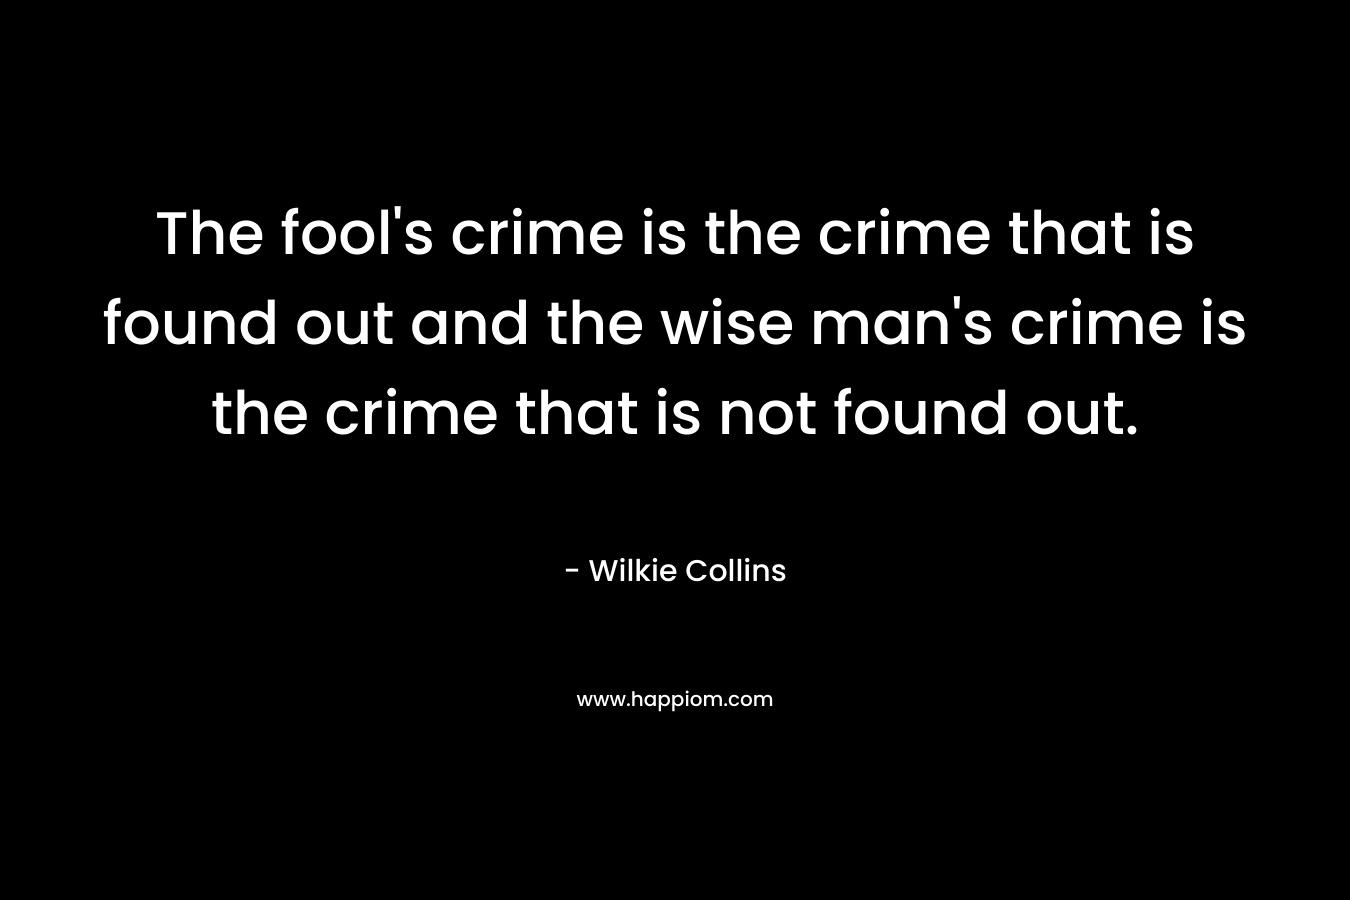 The fool's crime is the crime that is found out and the wise man's crime is the crime that is not found out.